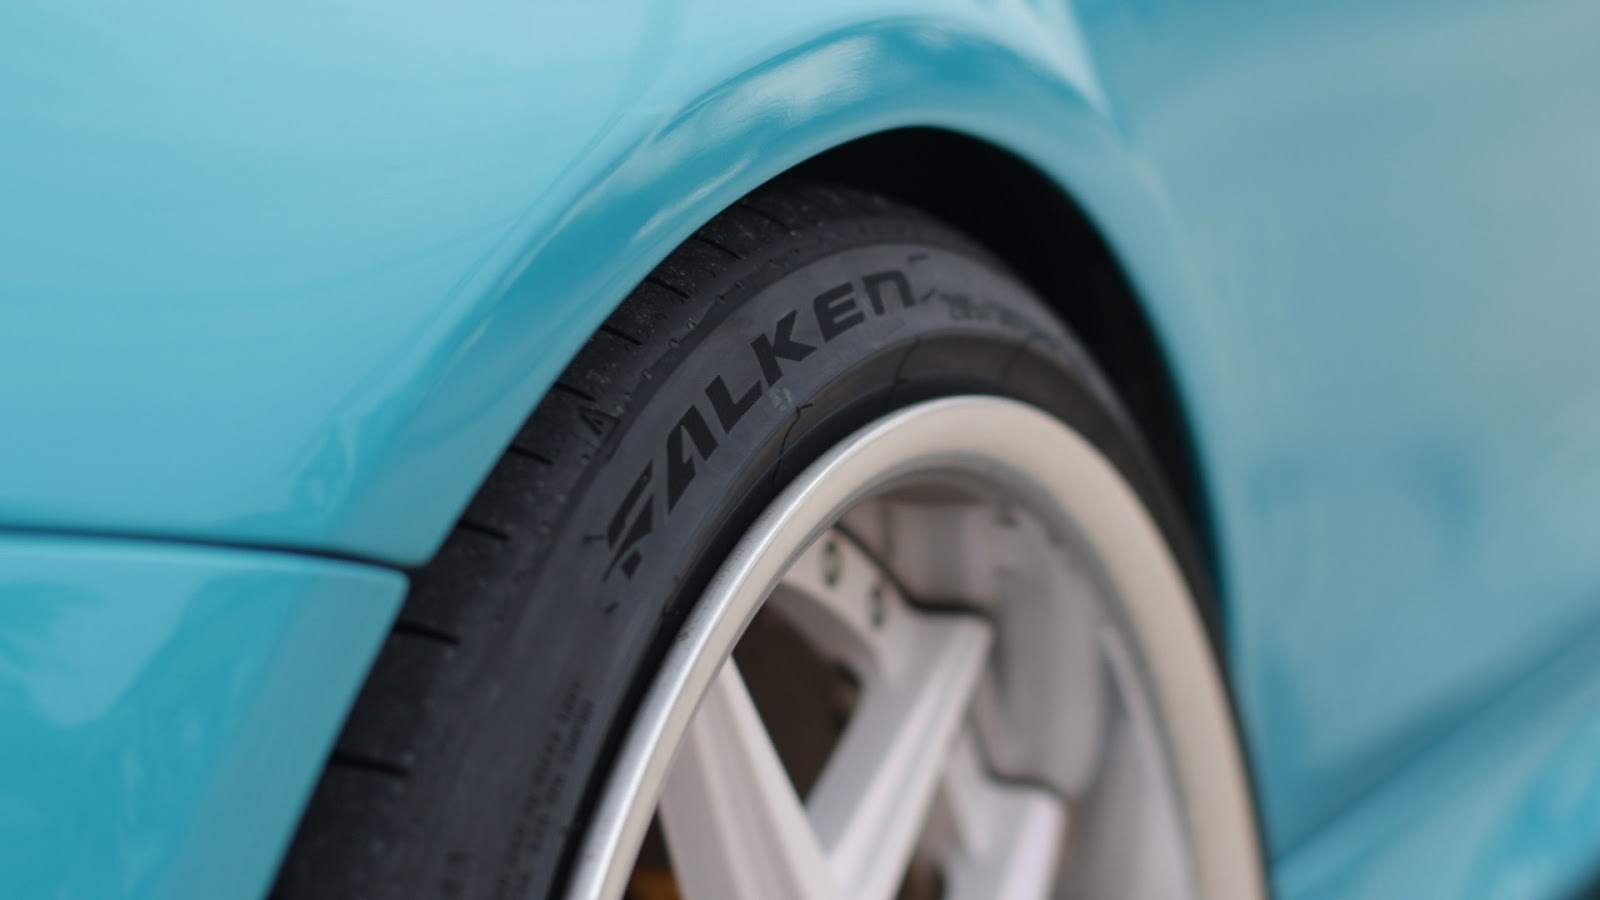 insights, unlocking excellence: introducing the new falken azenis fk520l - could this be the pinnacle of falken's tyre engineering?